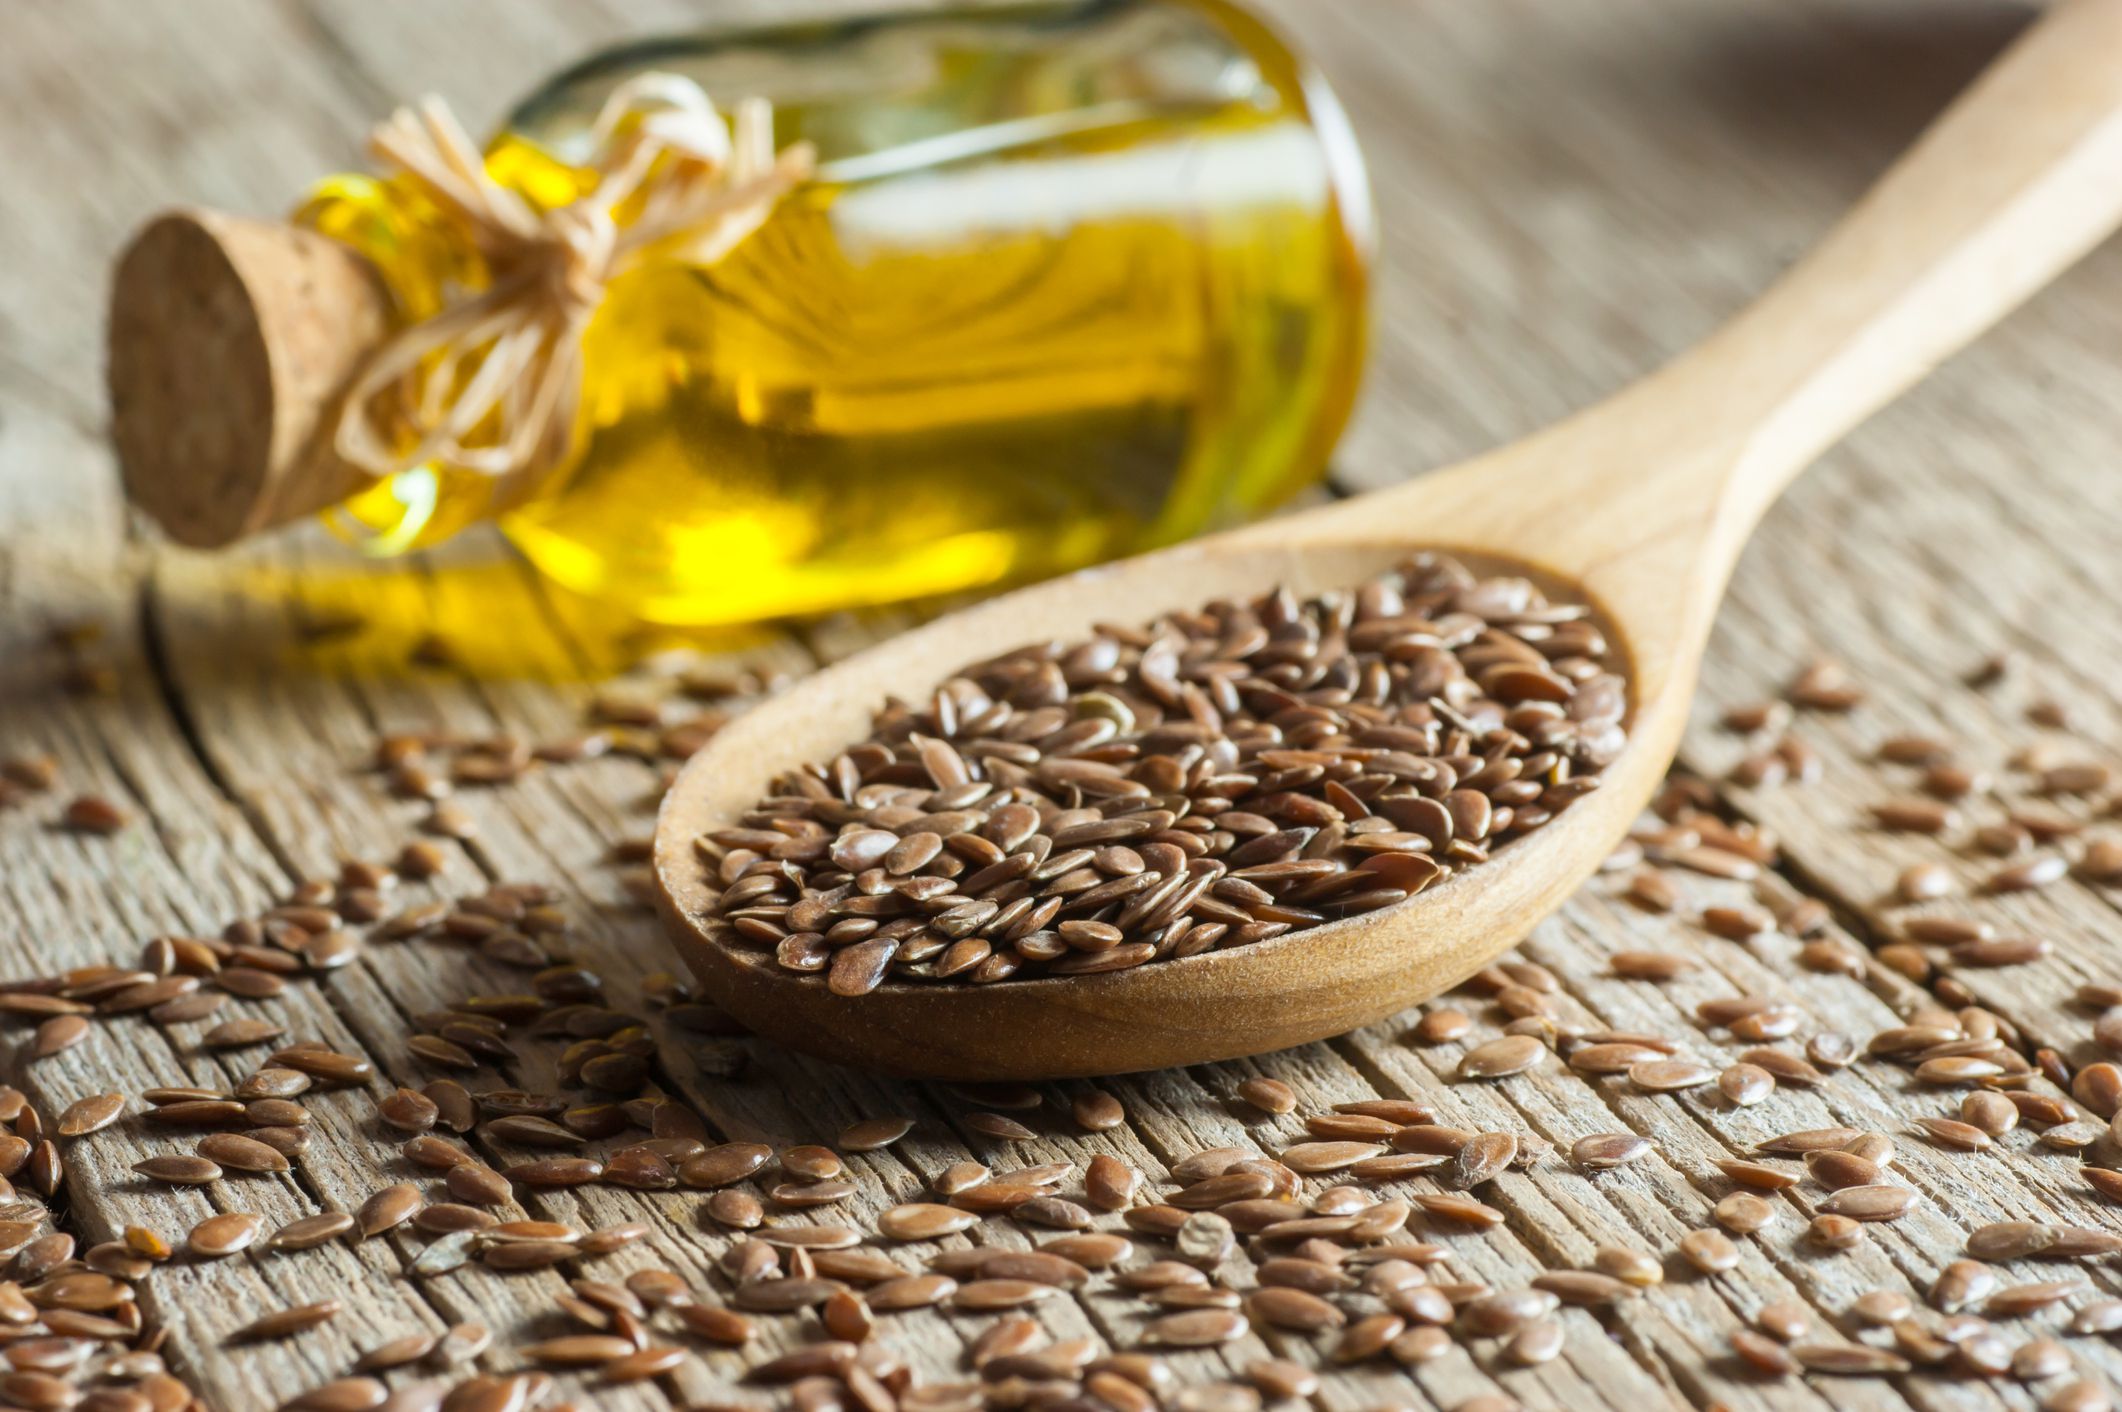 Flaxseed Oil: Benefits, Side Effects, Dosage, and Interactions